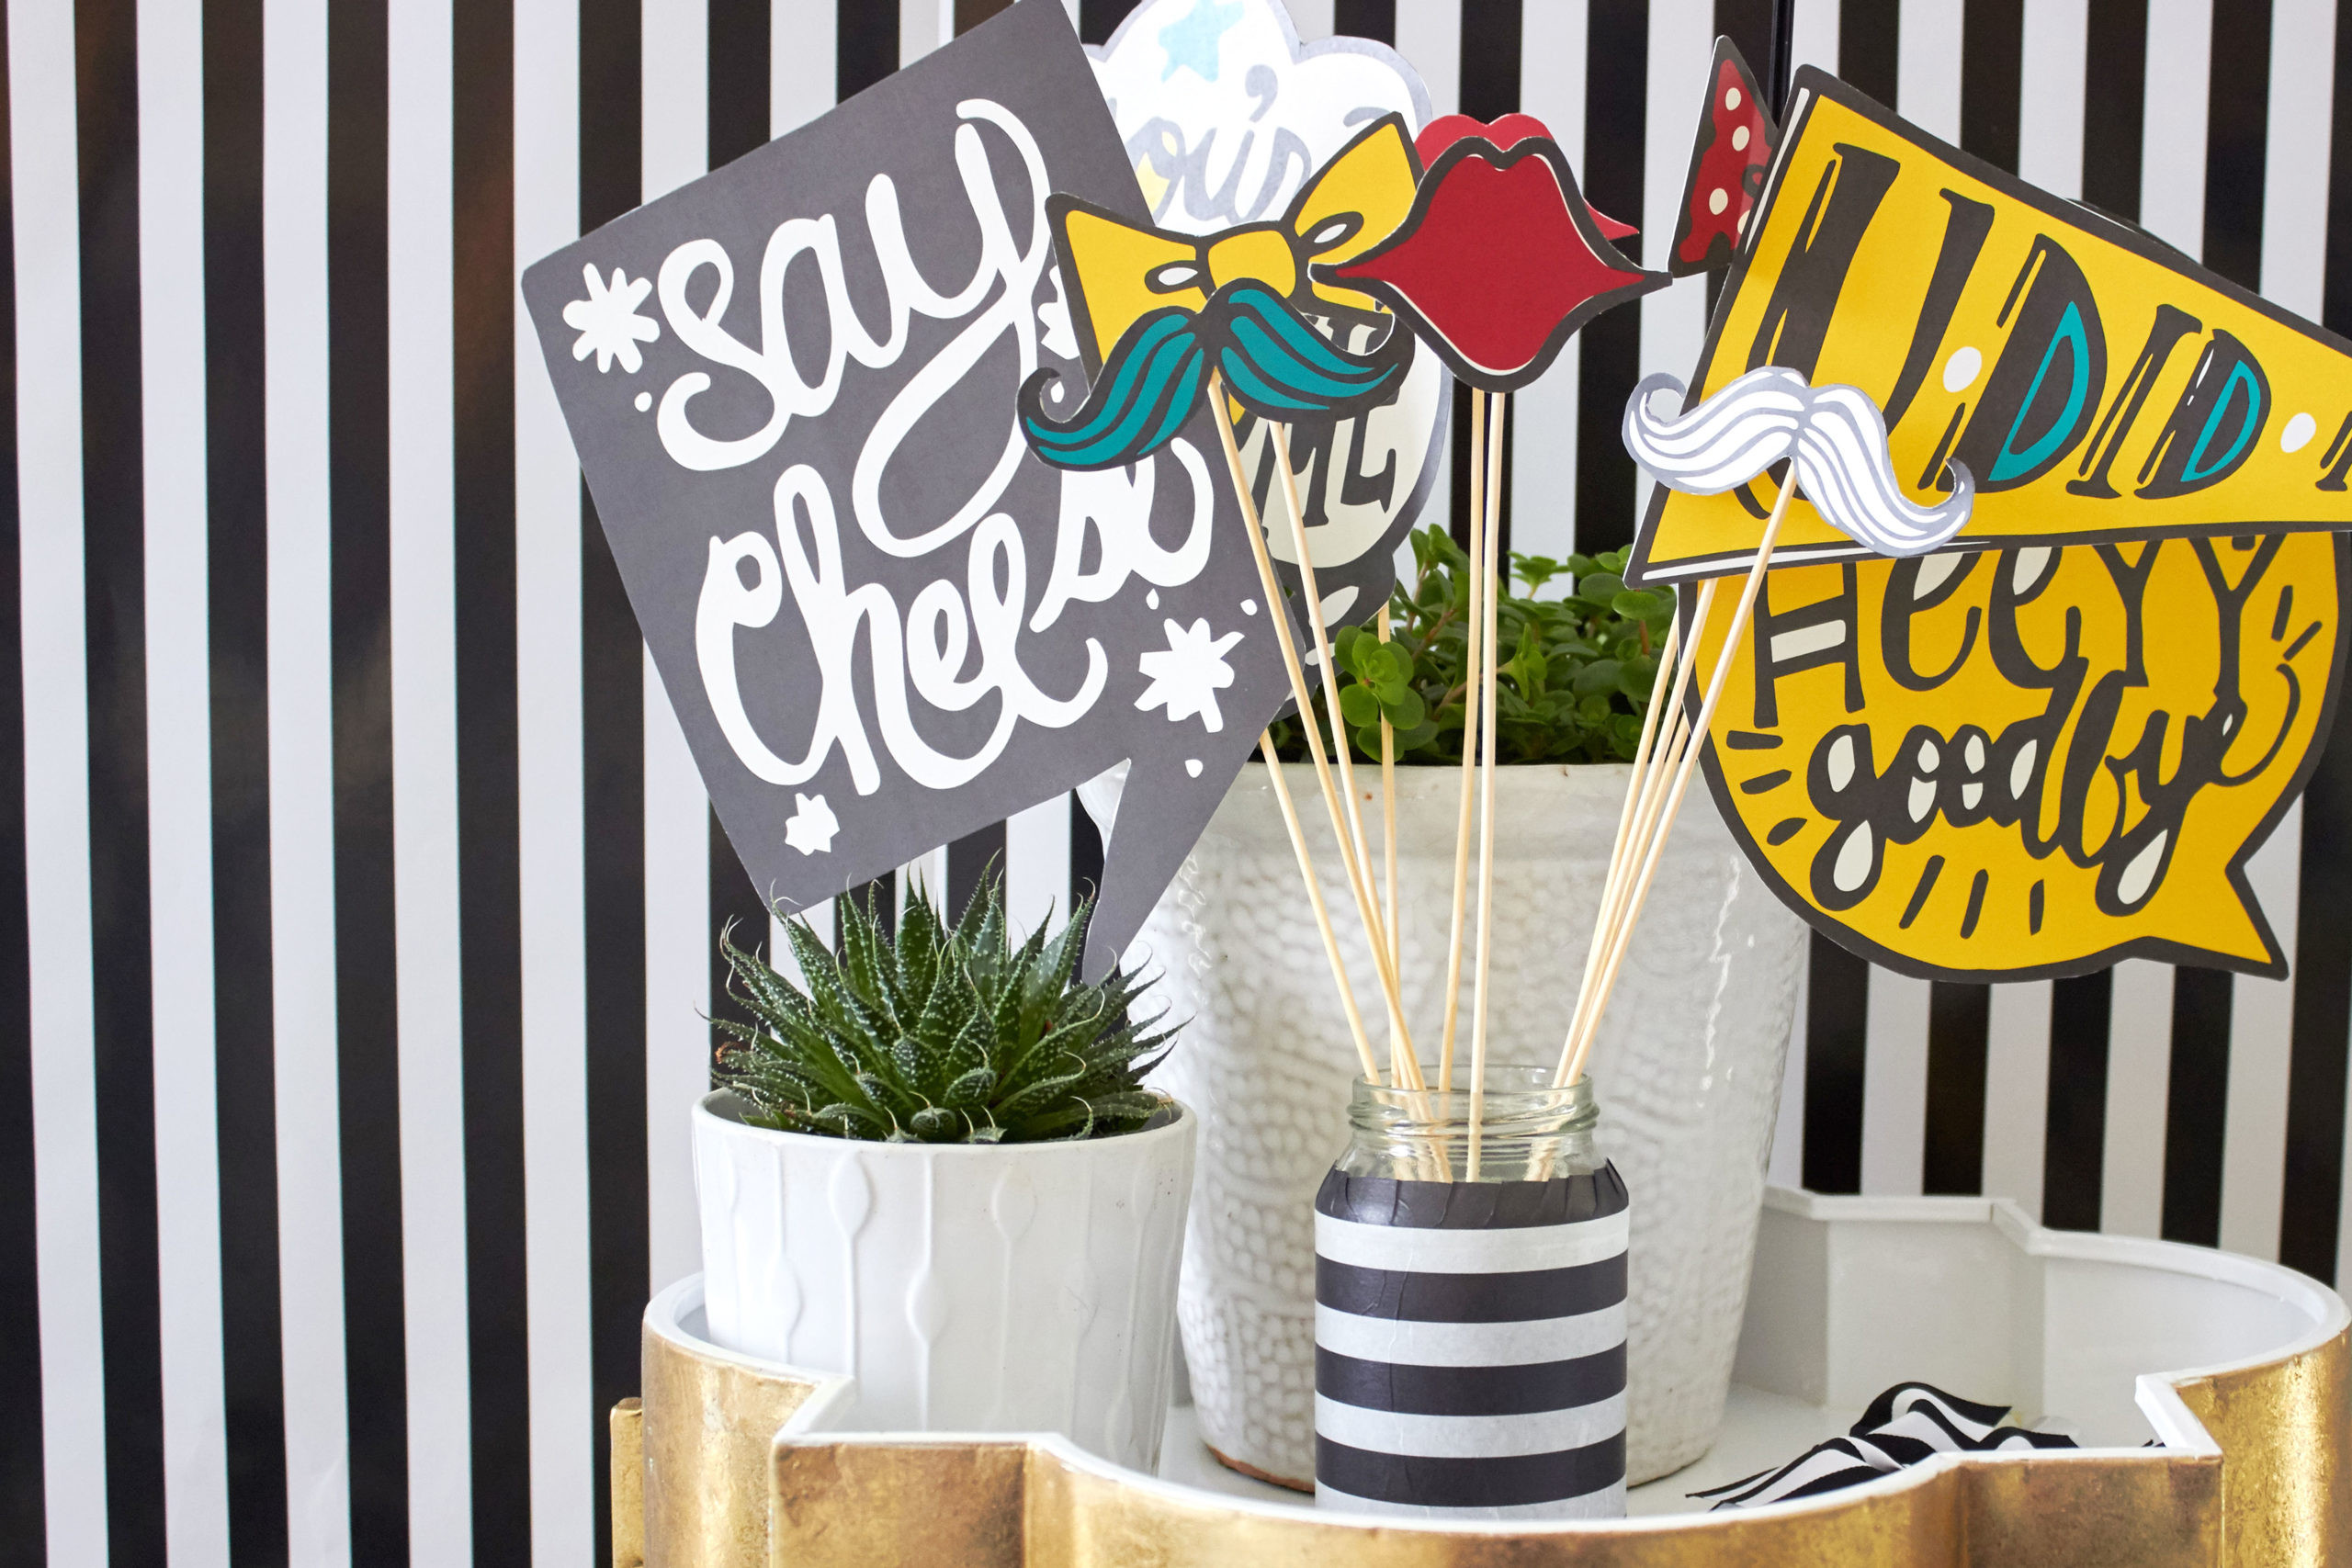 Graduation Party Photo Booth Ideas
 This Graduation Booth Will Give Your Party Major